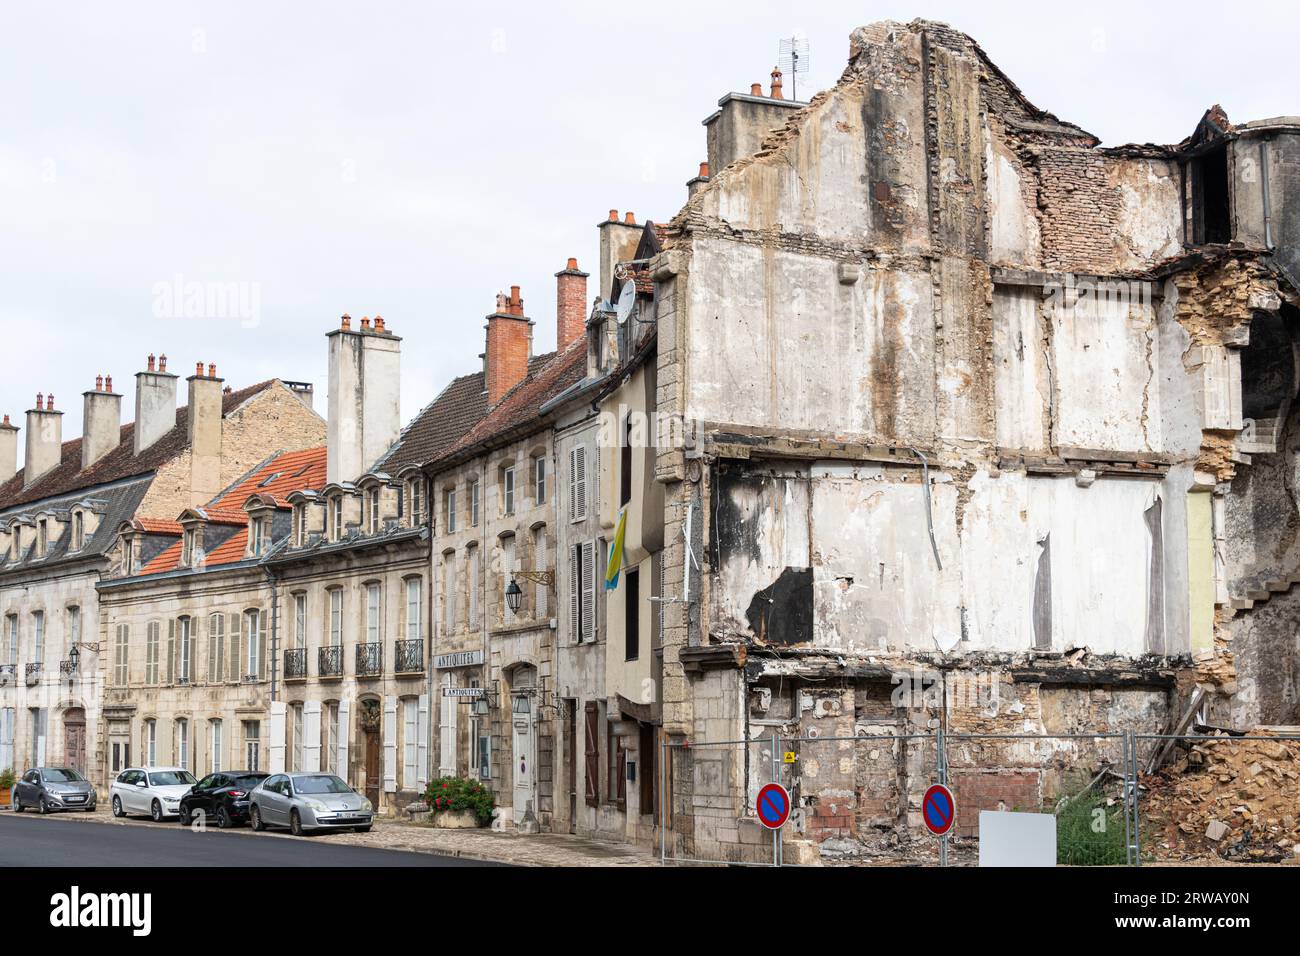 A Ruined House at the end of a terrace in Rue de Bourg, Chatillon-sur-Seine, France. Stock Photo